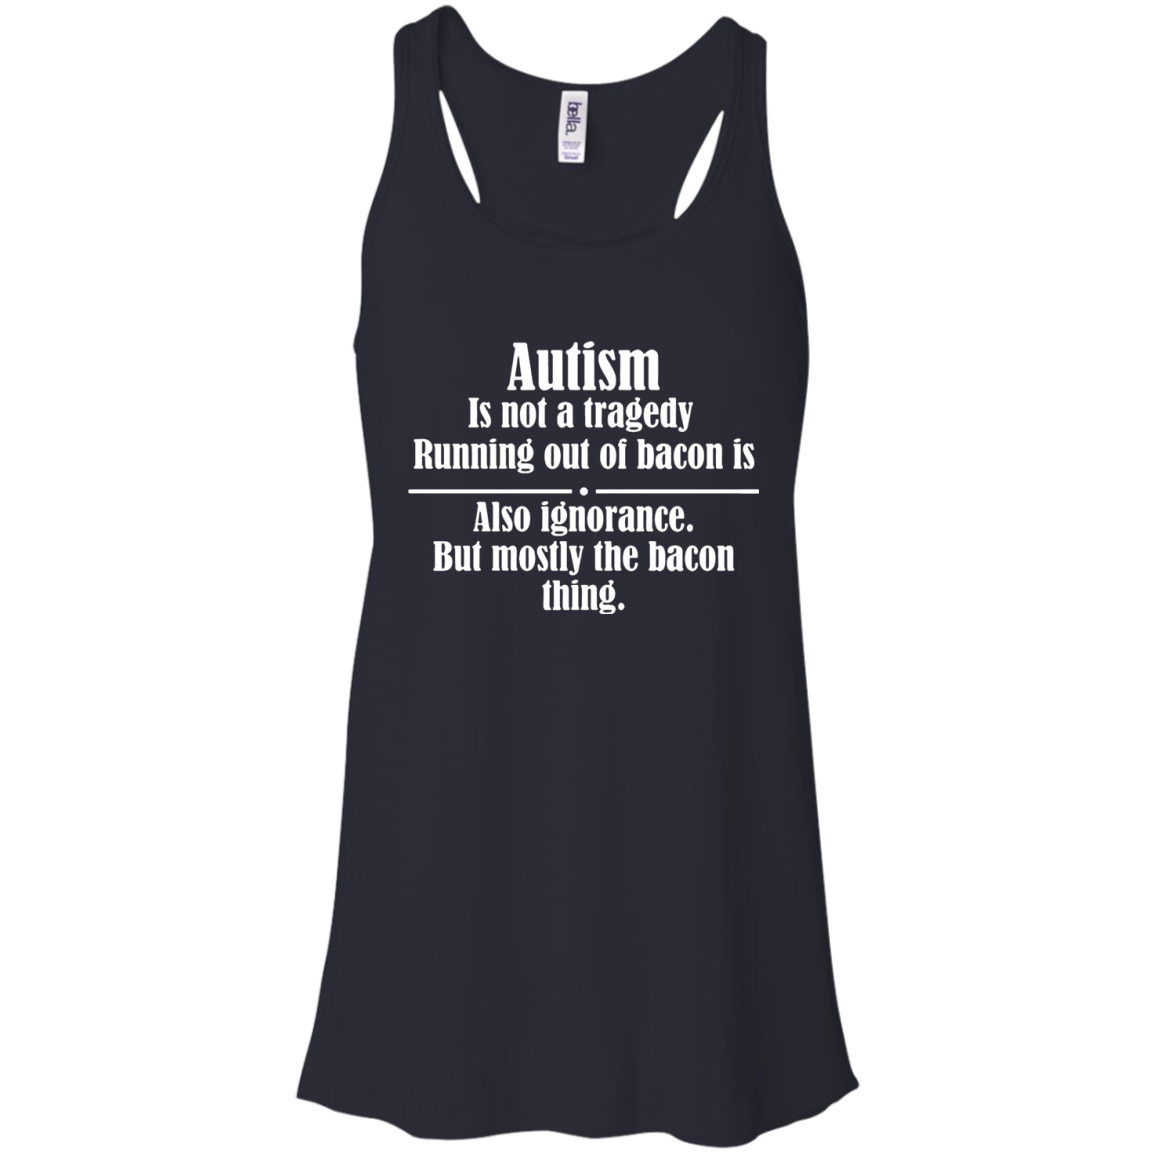 Autism It Not A Tragedy Running Out Of Bacon Is Shirt Racerback Tank